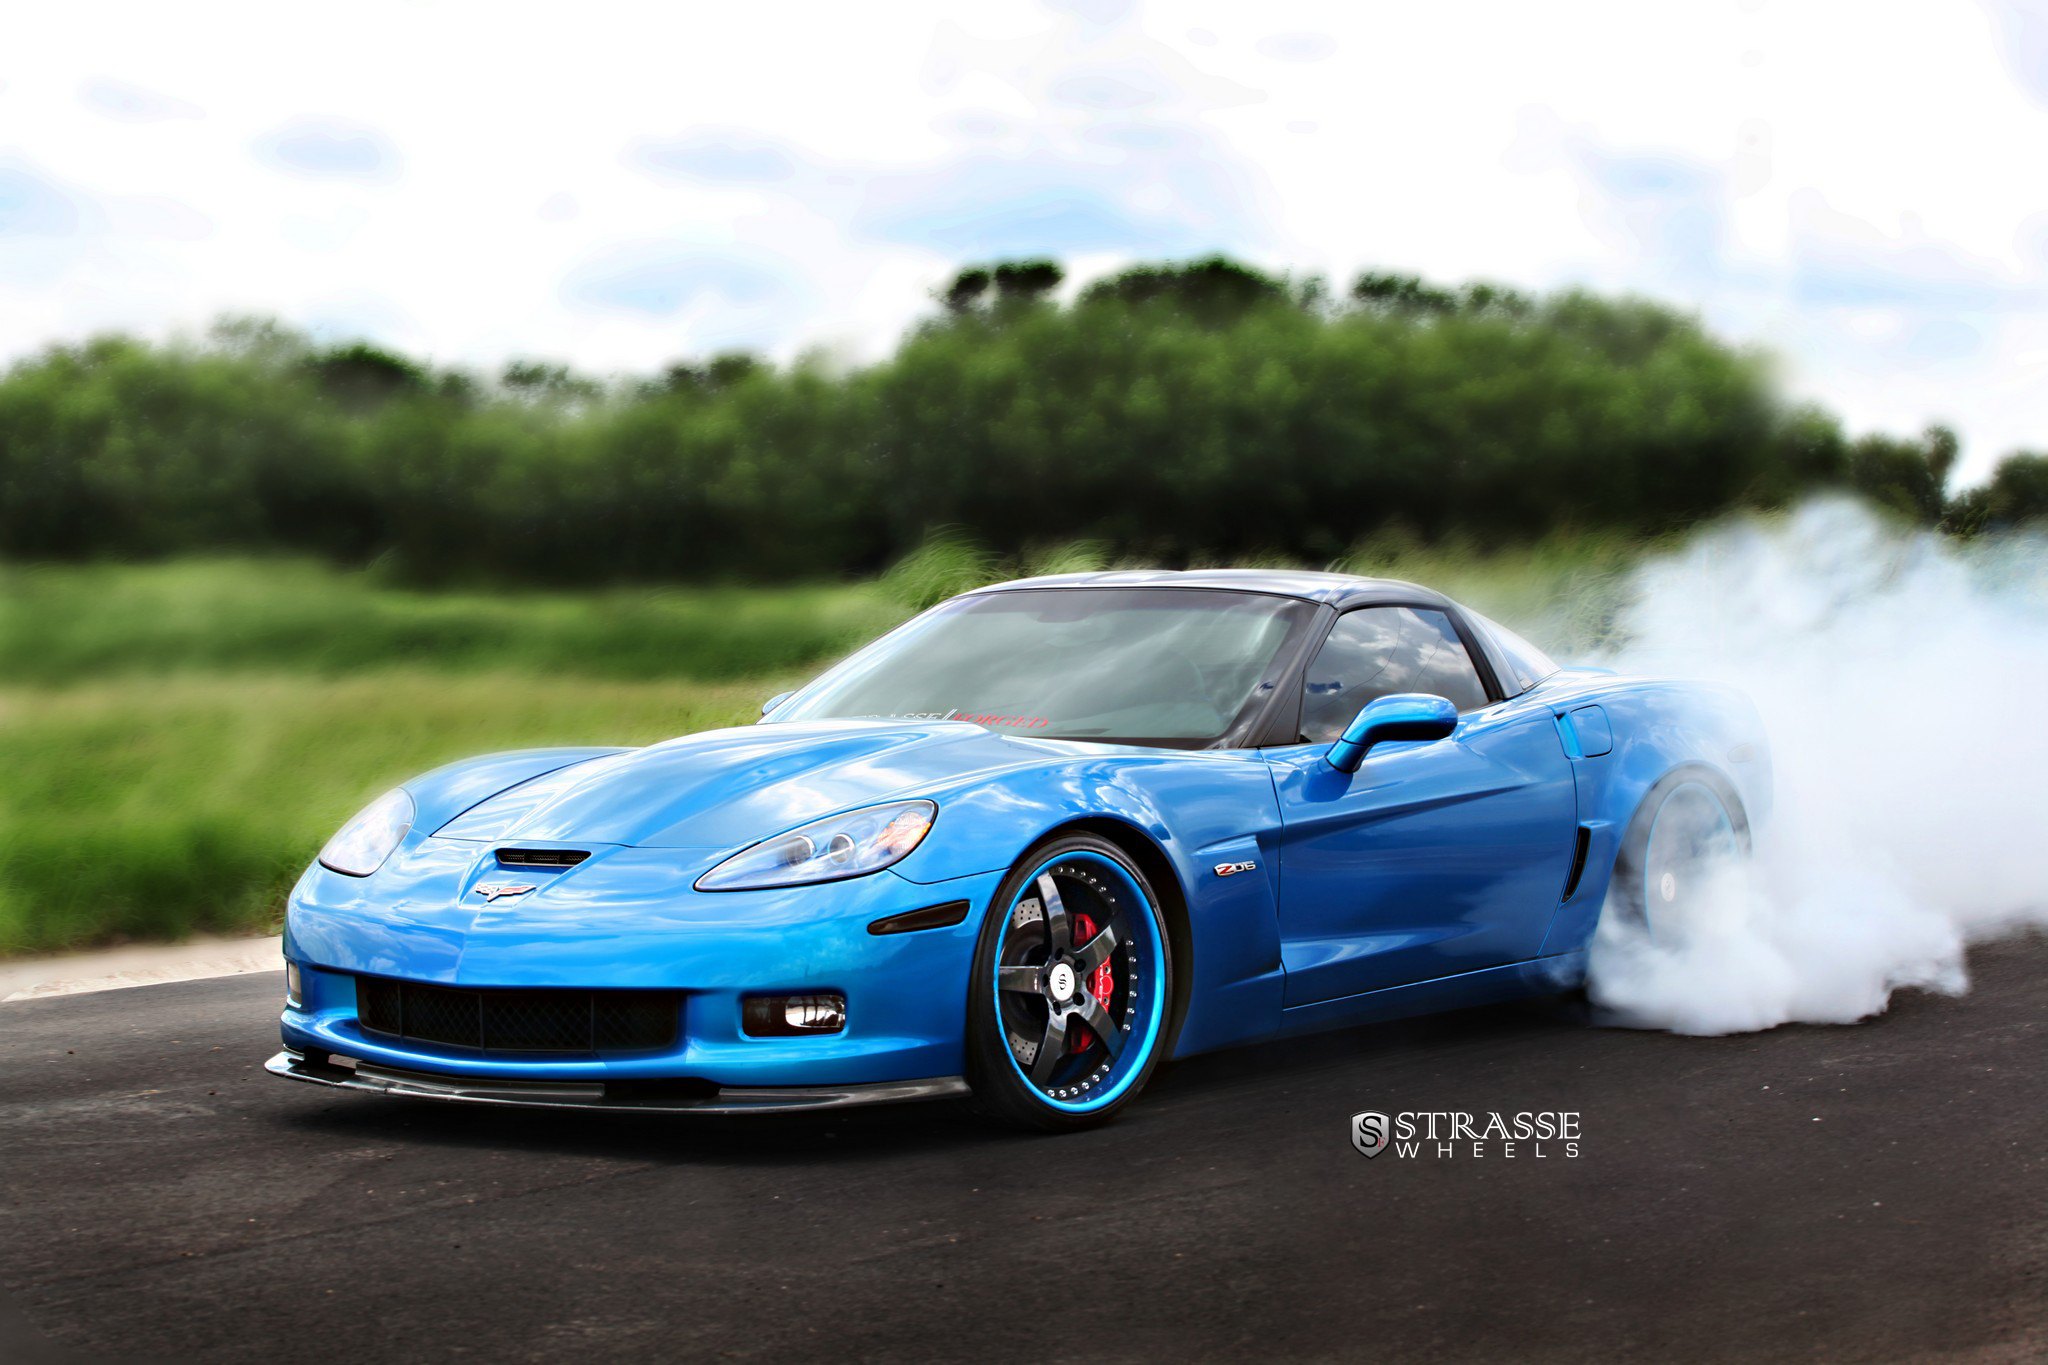 Blue Chevy Corvette with Aftermarket Front Bumper - Photo by Strasse Forged